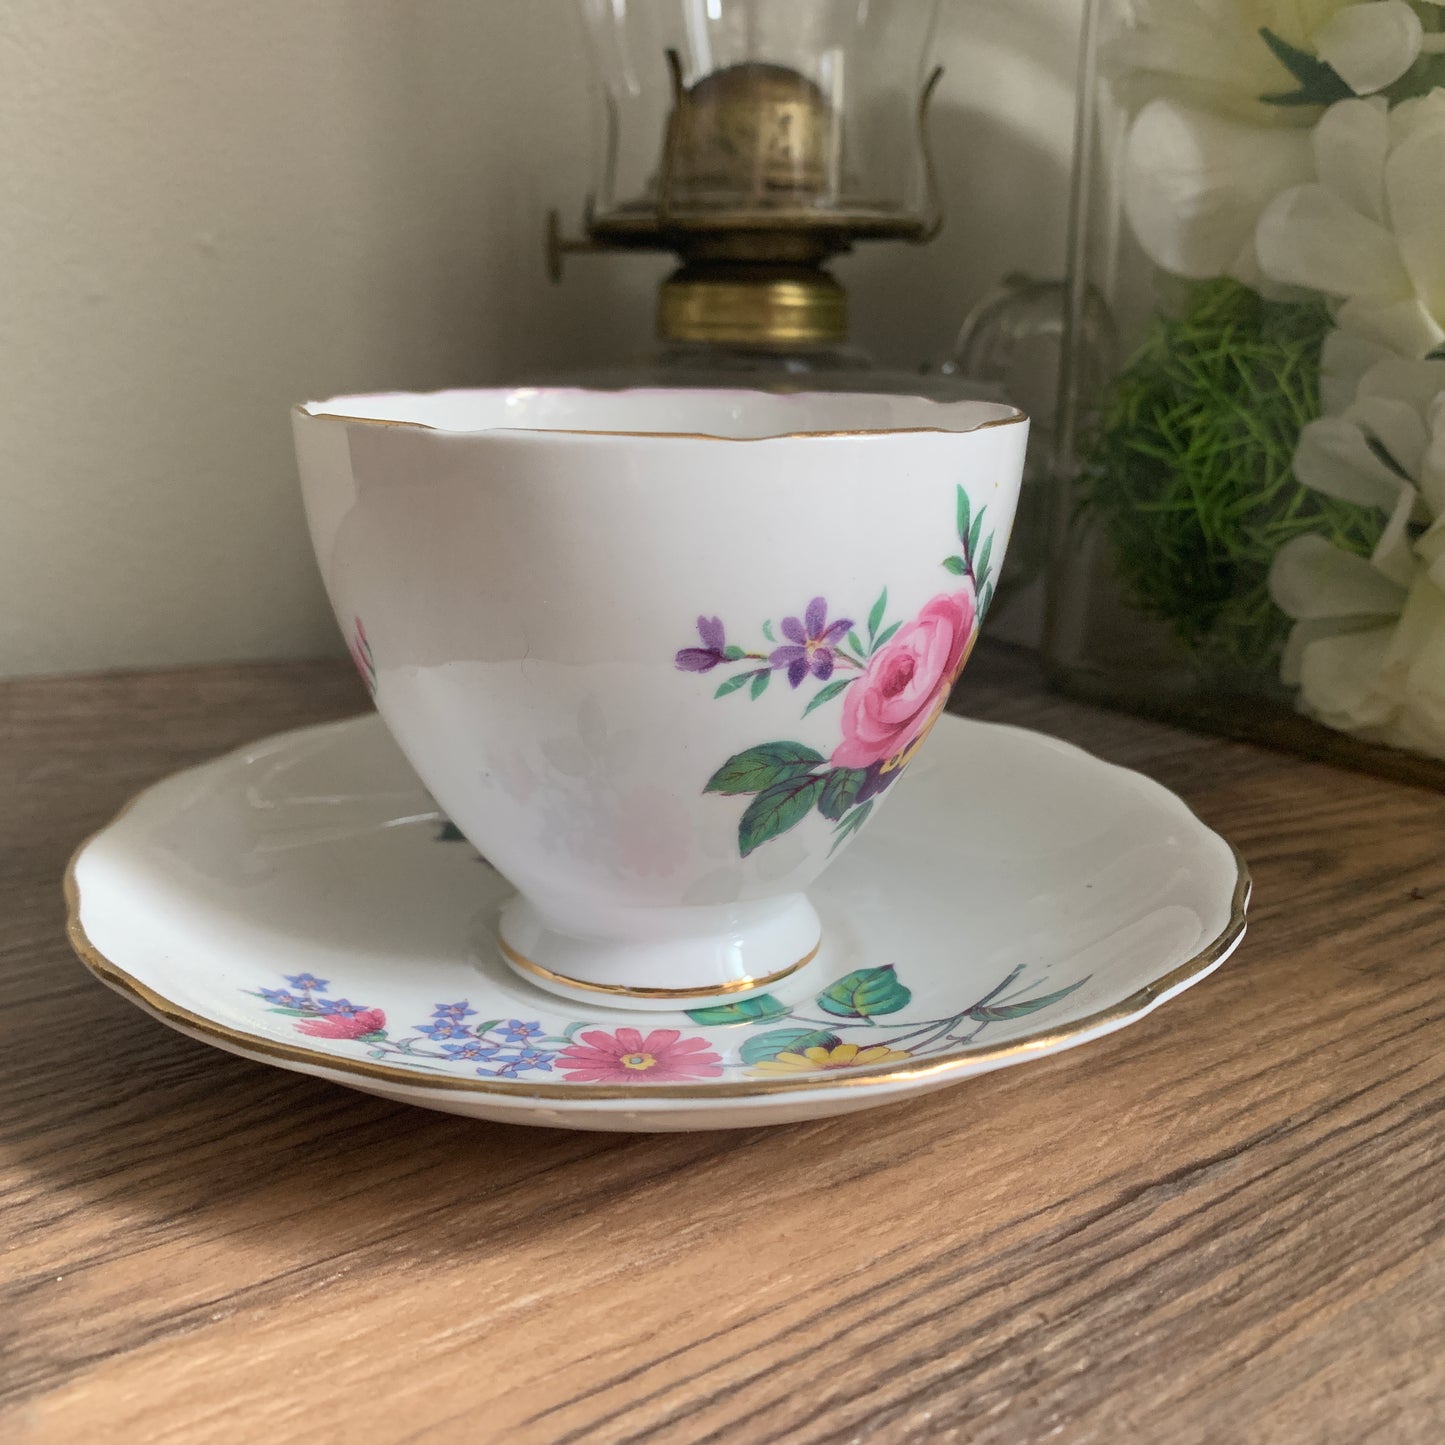 Mismatch Teacup Colourful Floral Tea Cup Pink and Yellow Spring Flowers